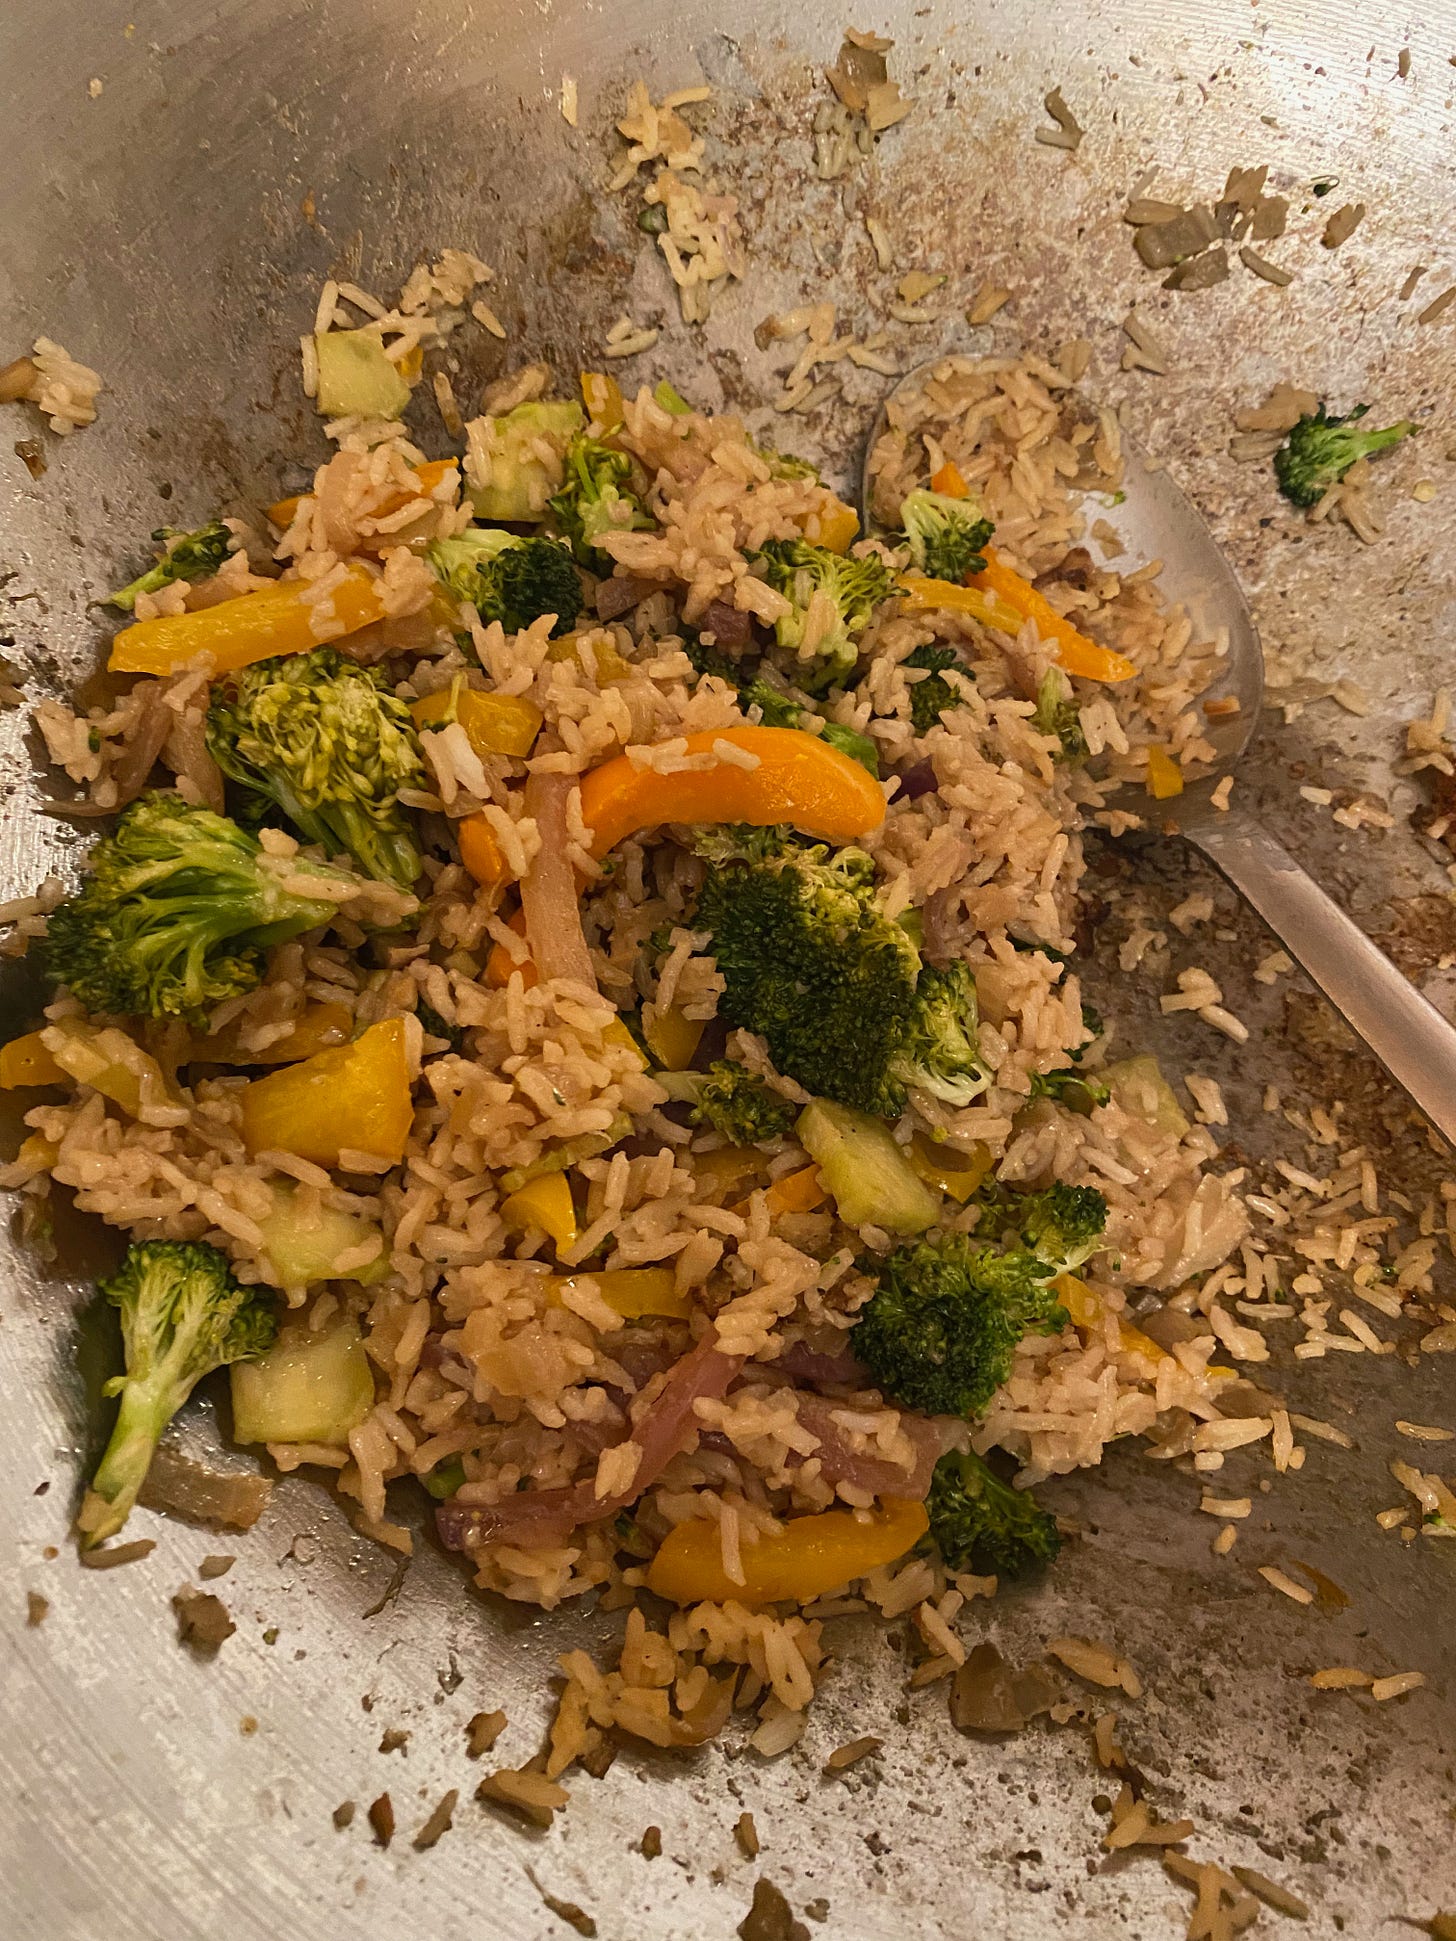 A pile of rice, yellow peppers, and broccoli in a wok.